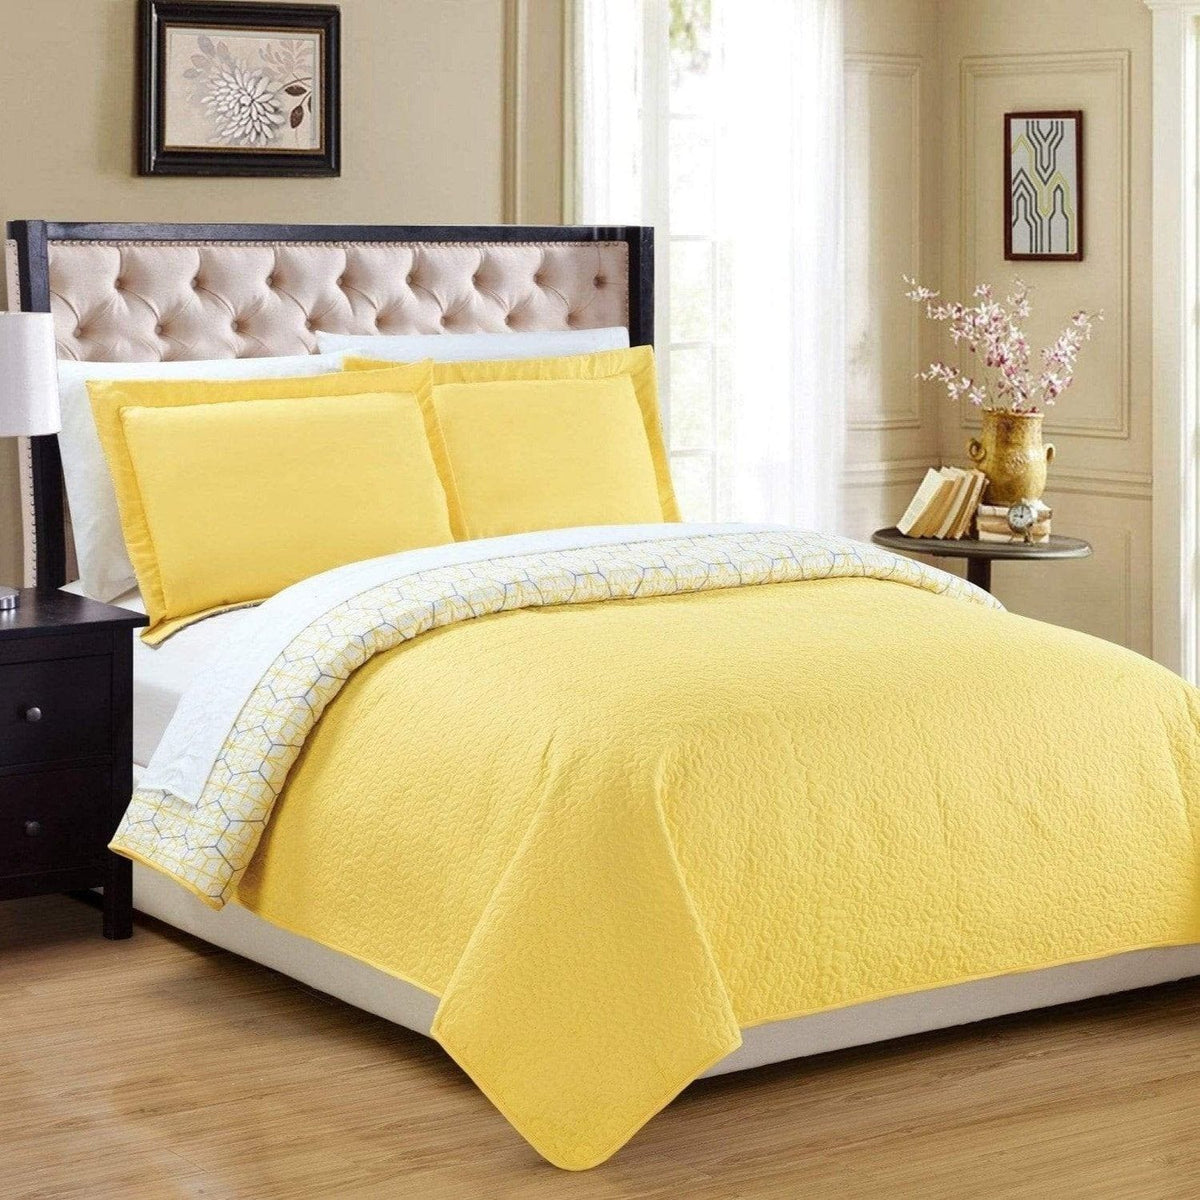 Chic Home Lori 7 Piece Reversible Quilt Set Yellow